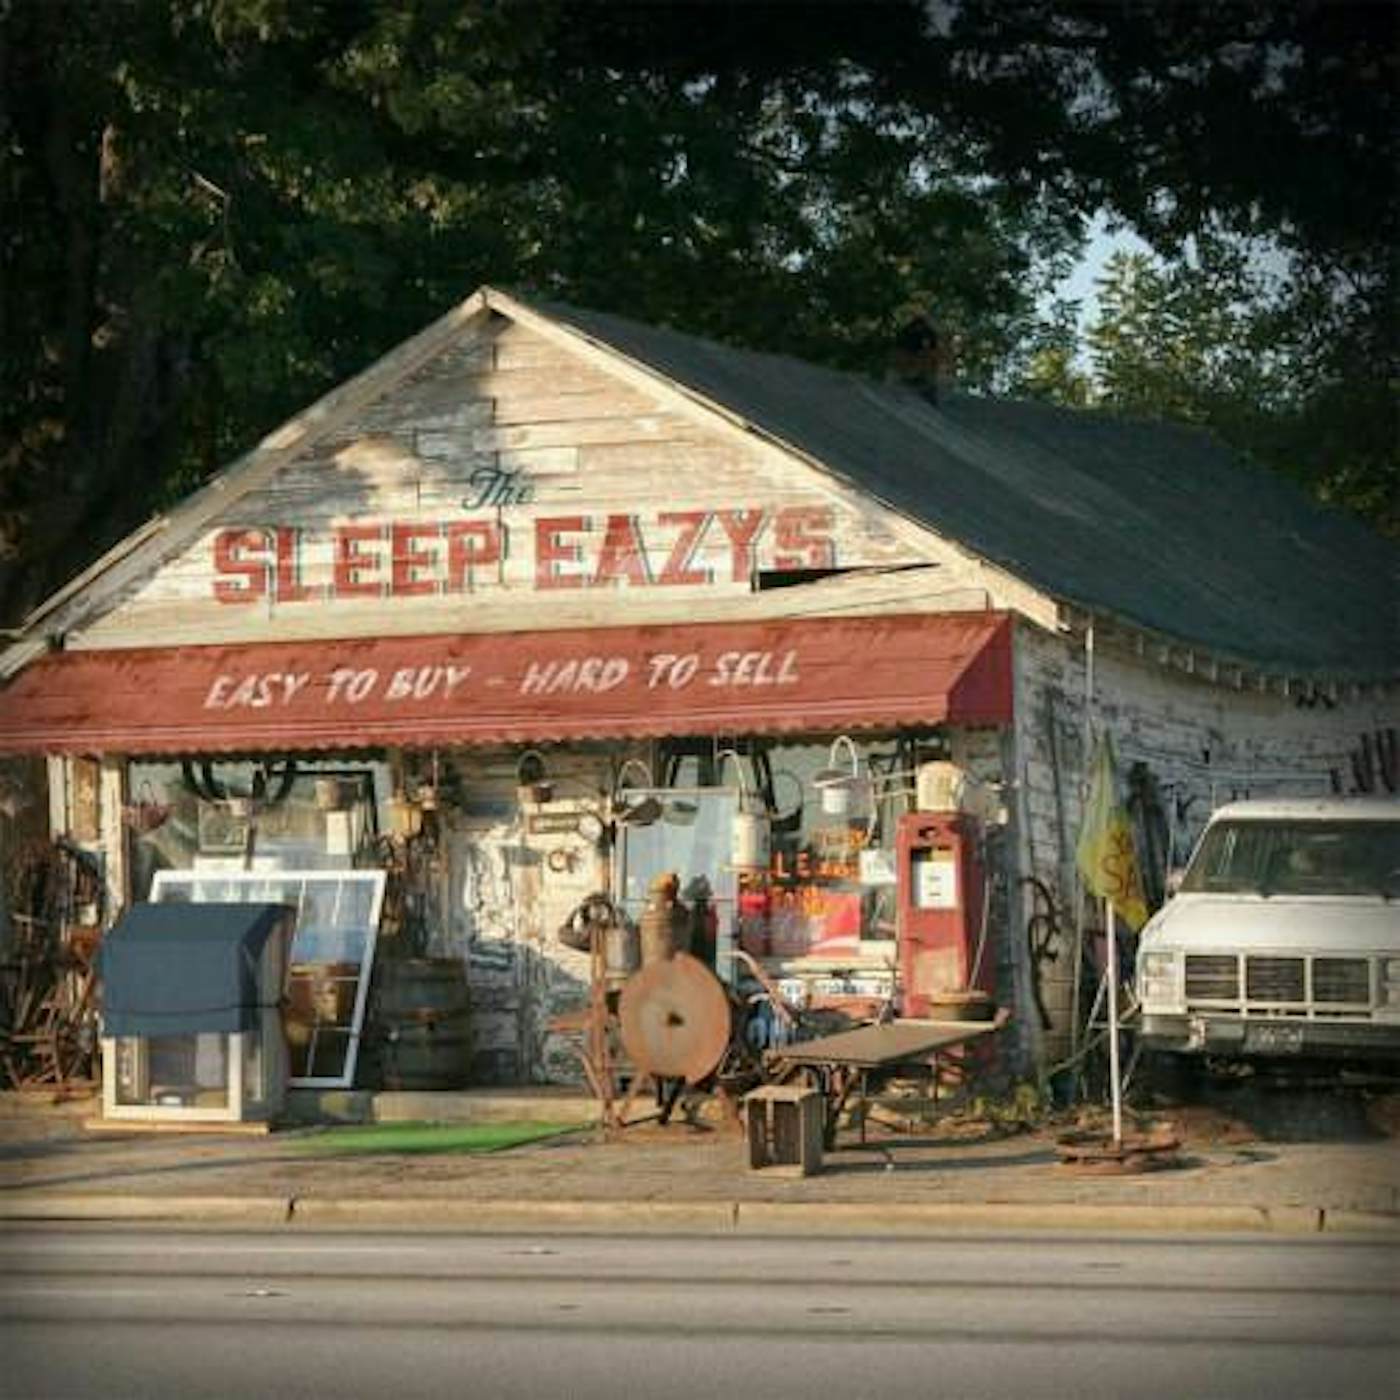 The Sleep Eazys EASY TO BUY HARD TO SELL CD